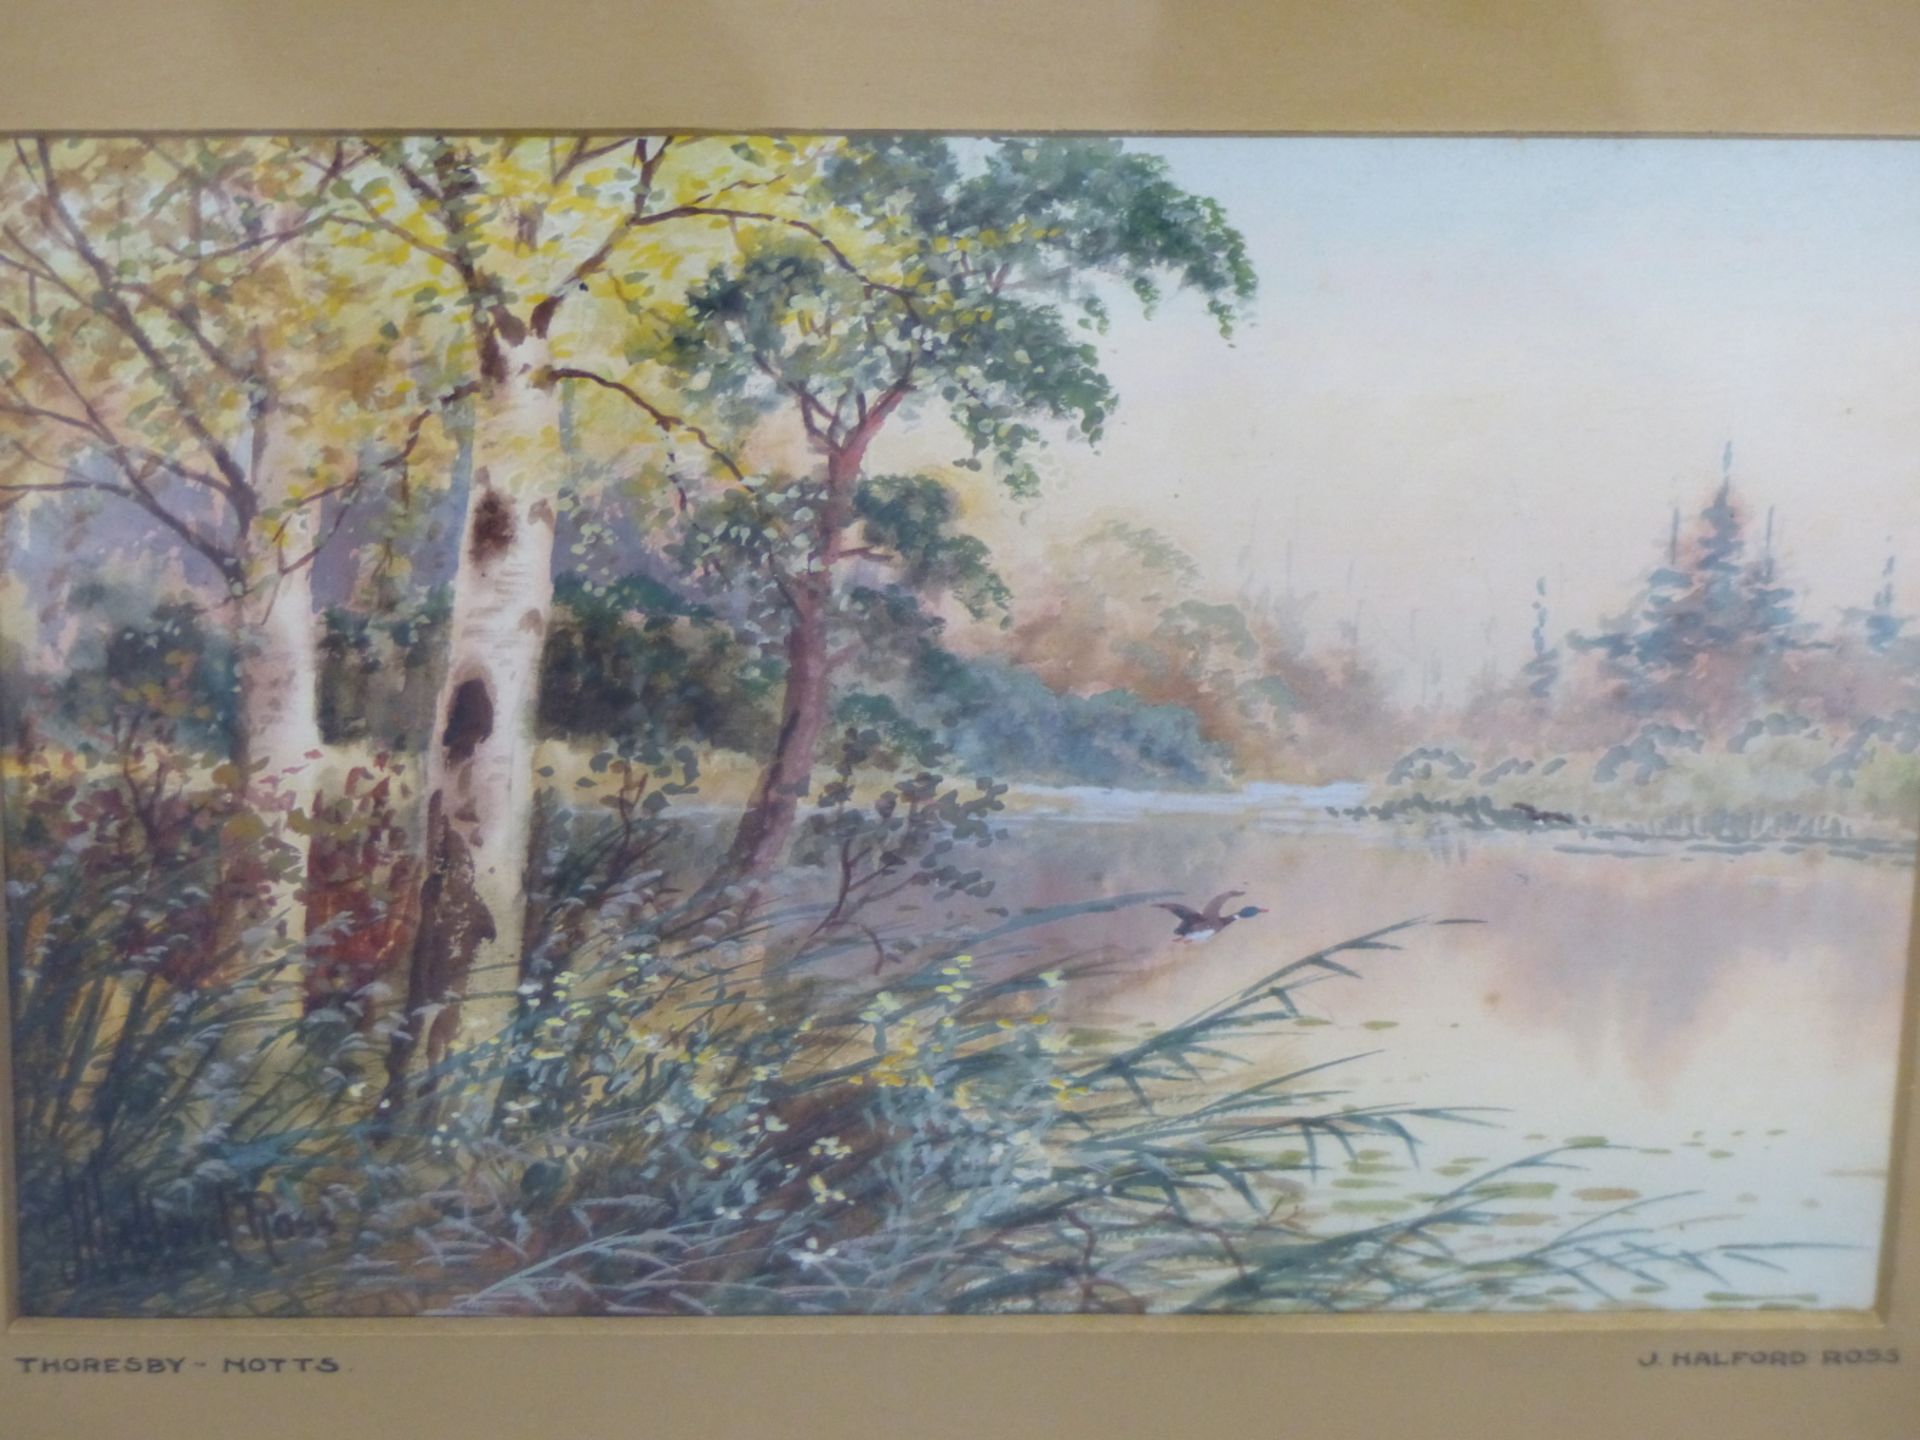 J. HALFORD ROSS (EARLY 20th C. ENGLISH SCHOOL) TWO WATERCOLOURS OF RIVER SCENES, SIGNED. 19 x - Image 5 of 5